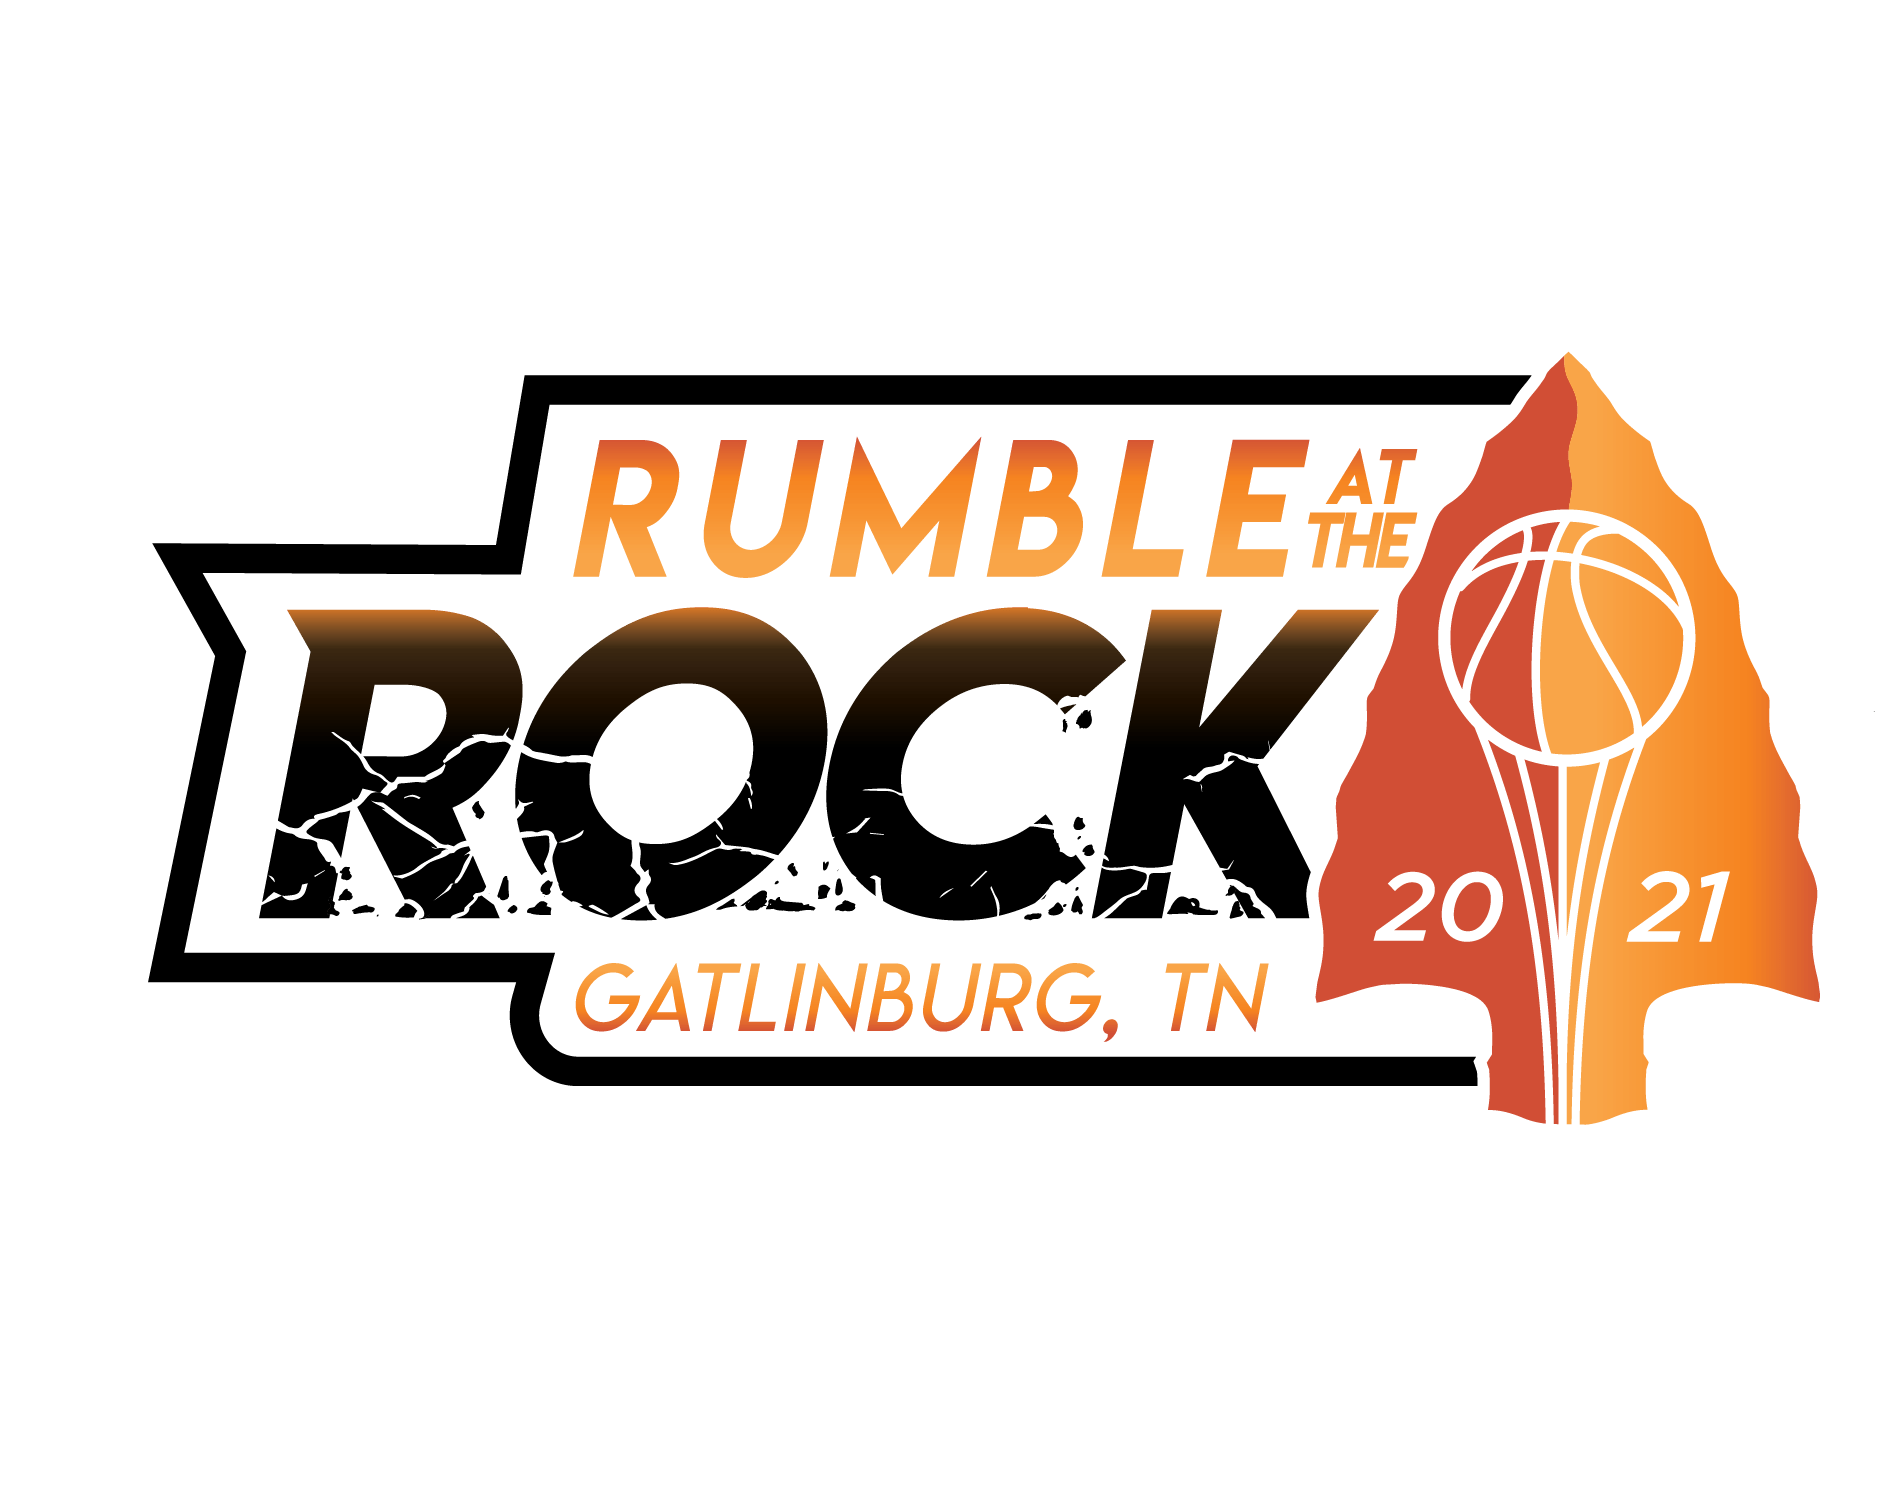 Rumble at the Rock